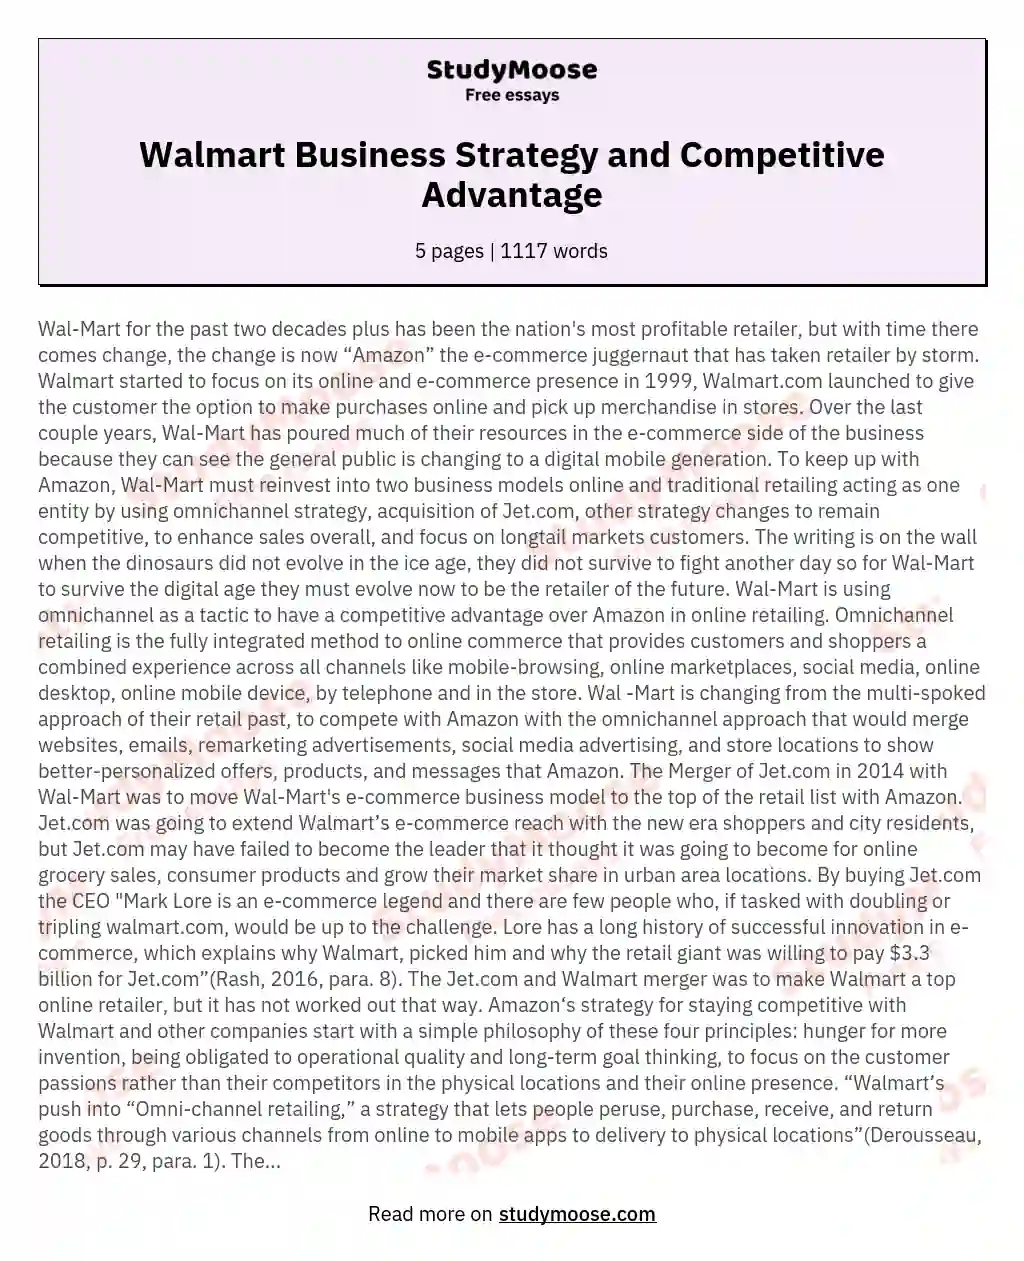 Walmart Business Strategy and Competitive Advantage essay